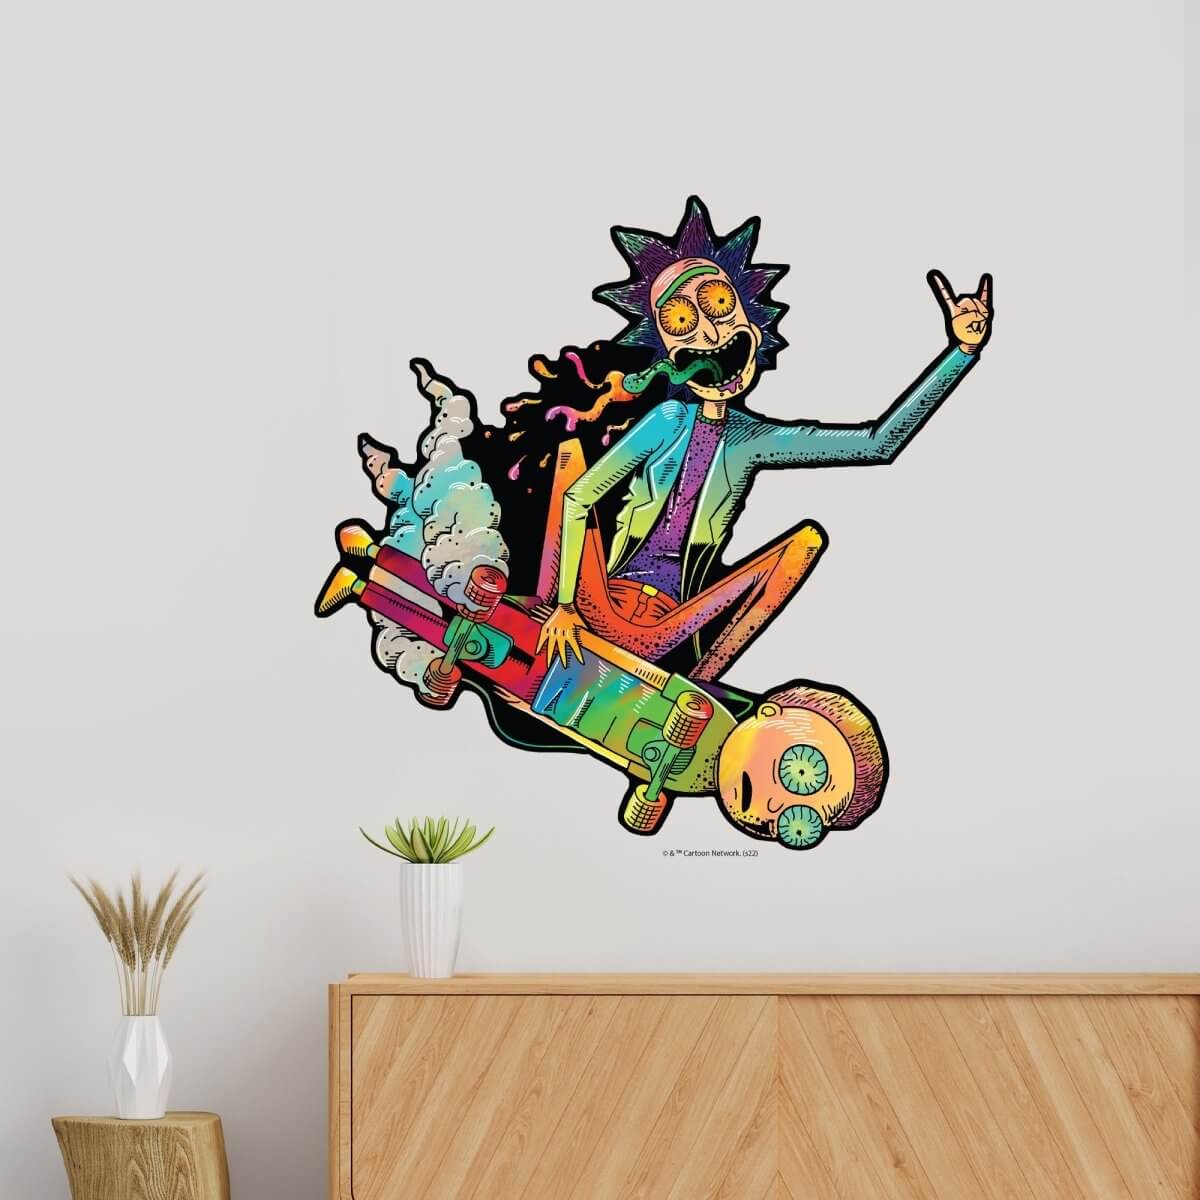 Kismet Decals Rick & Morty Psychedelic Monsters 4 Licensed Wall Sticker - Easy DIY Home & Kids Room Decor Wall Decal Art - Kismet Decals